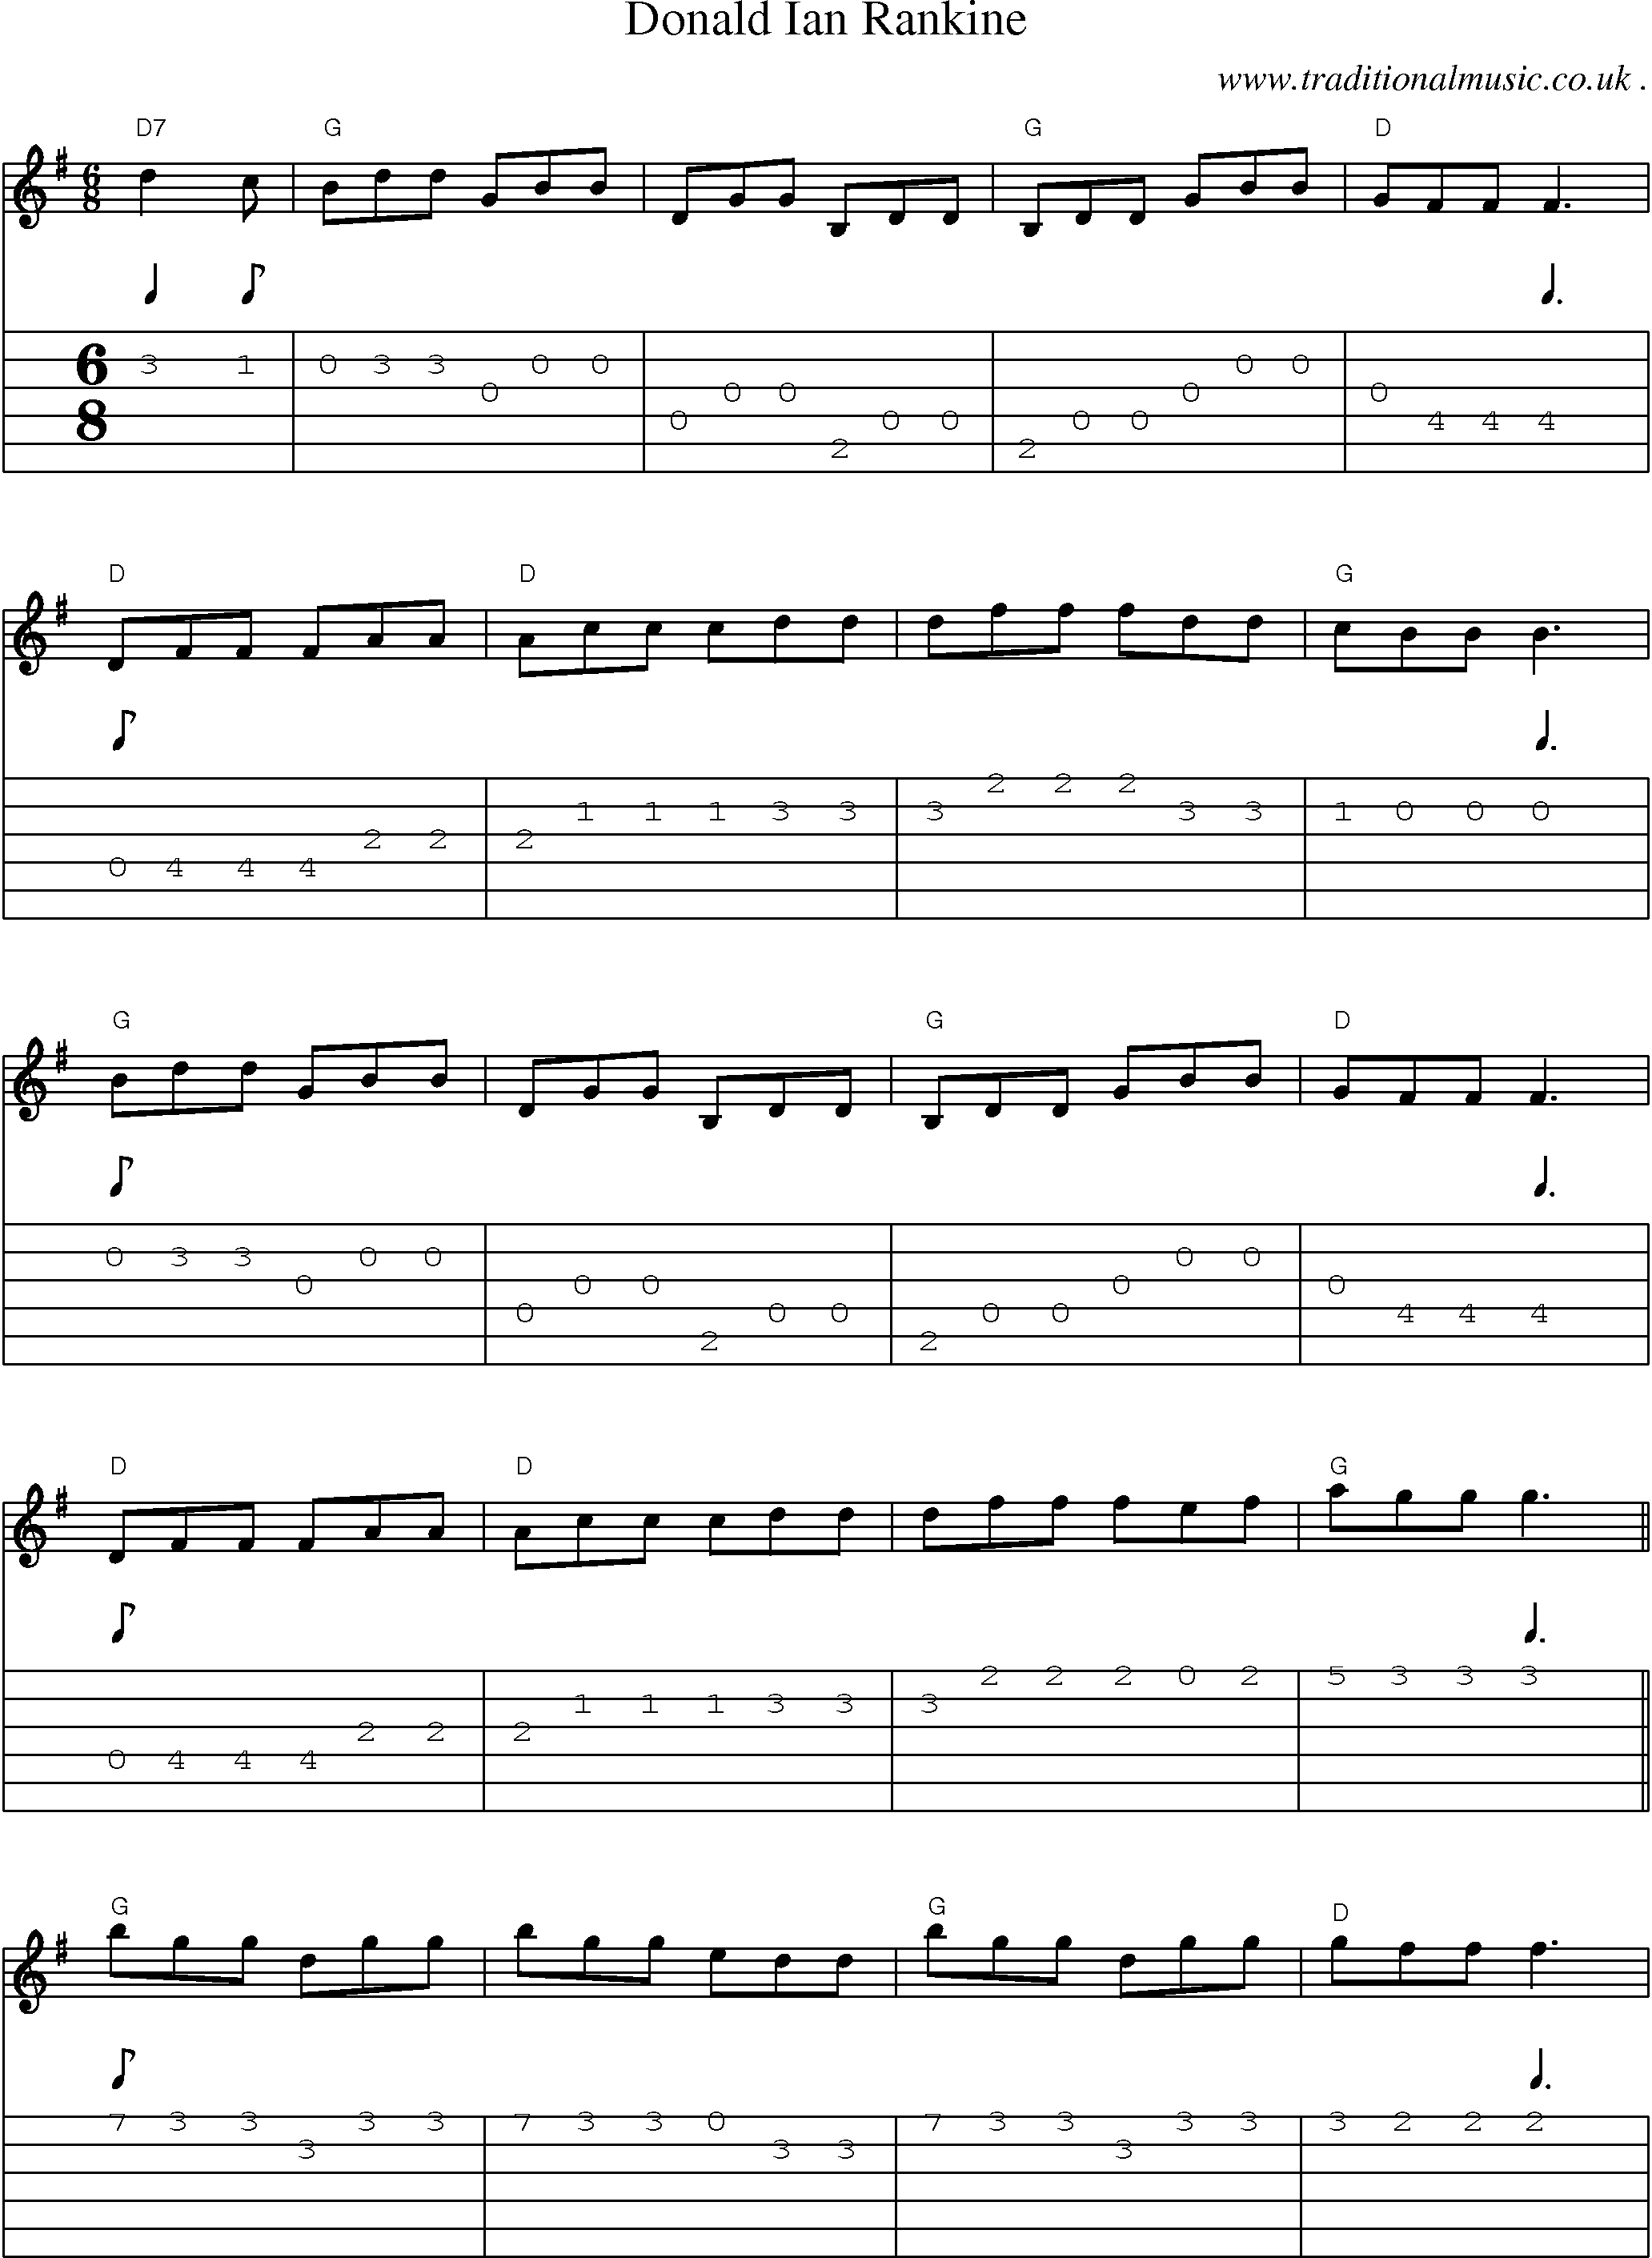 Sheet-Music and Guitar Tabs for Donald Ian Rankine